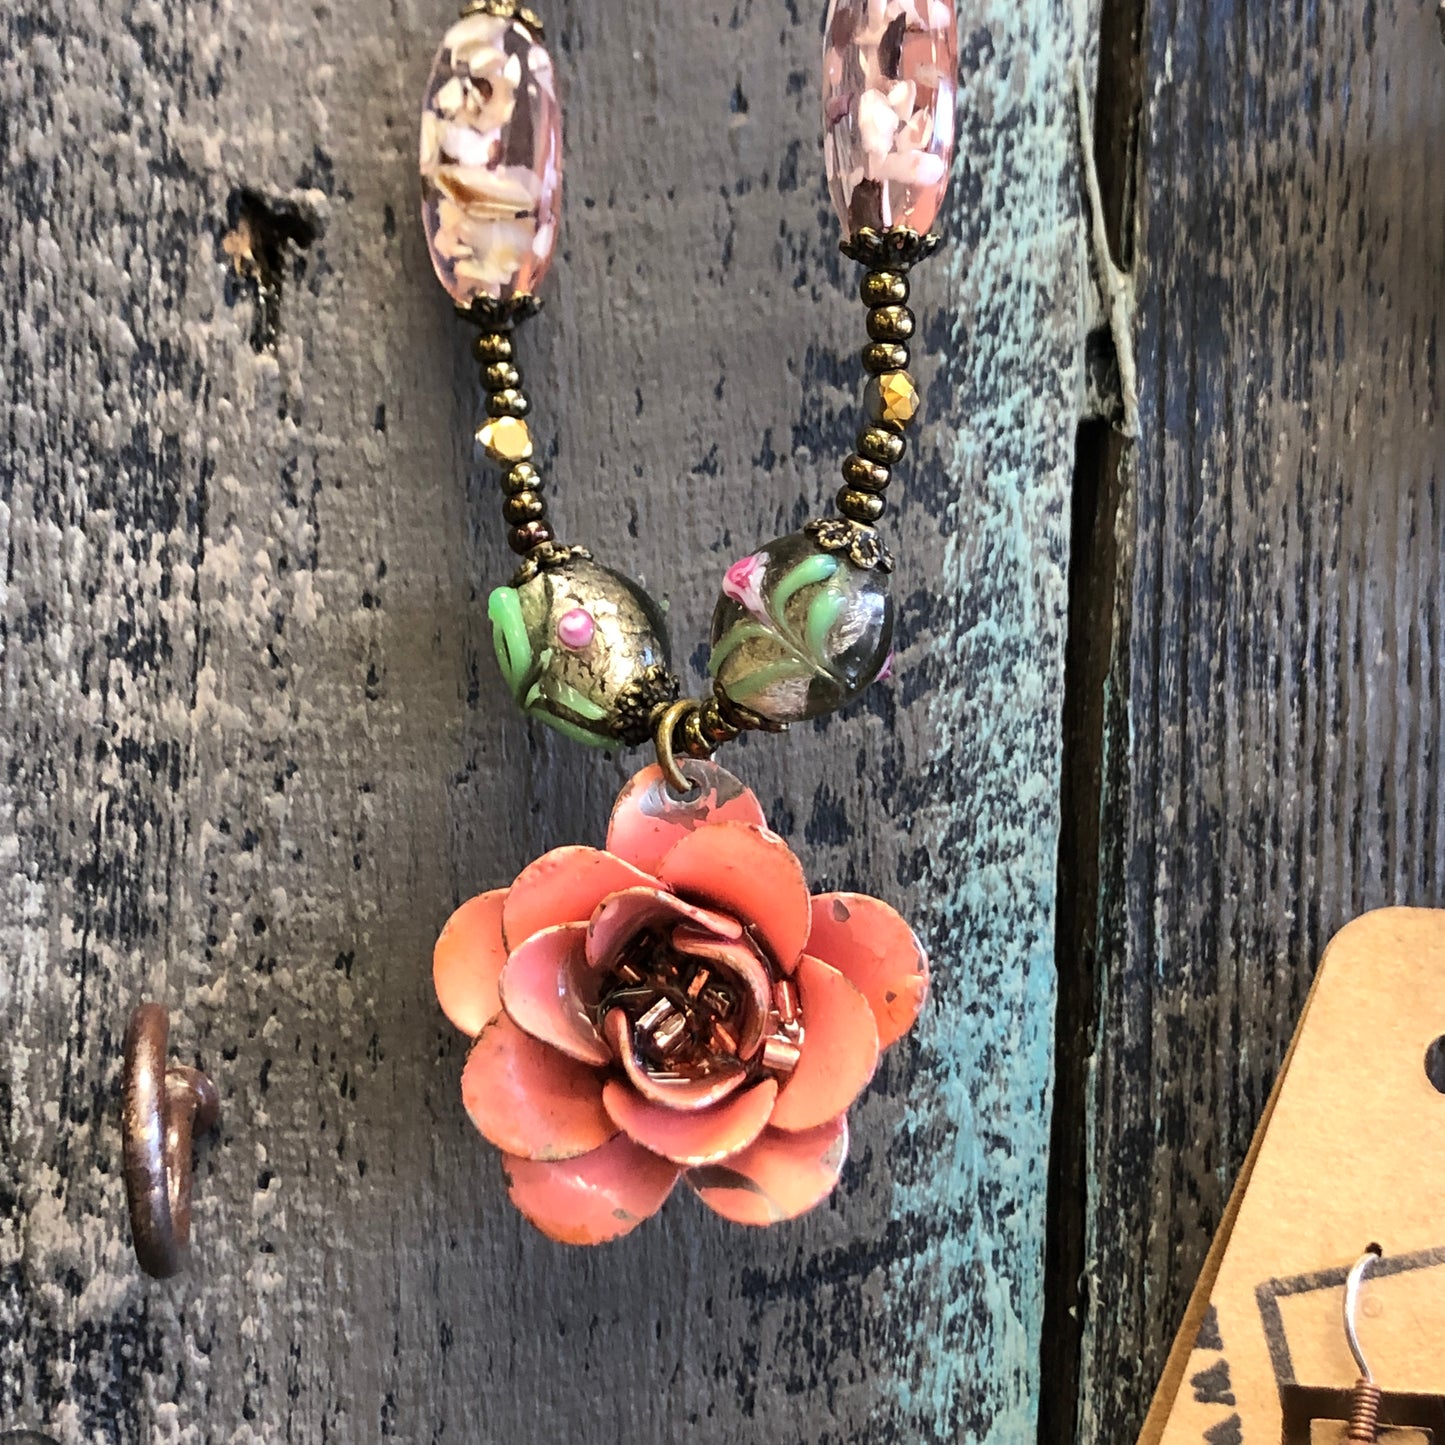 Miss Sweetness, Chippy Paint Flower Necklace in Coral, Butterflies, Hummingbirds, Handmade Lampwork Floral Beads, 20 Inches "